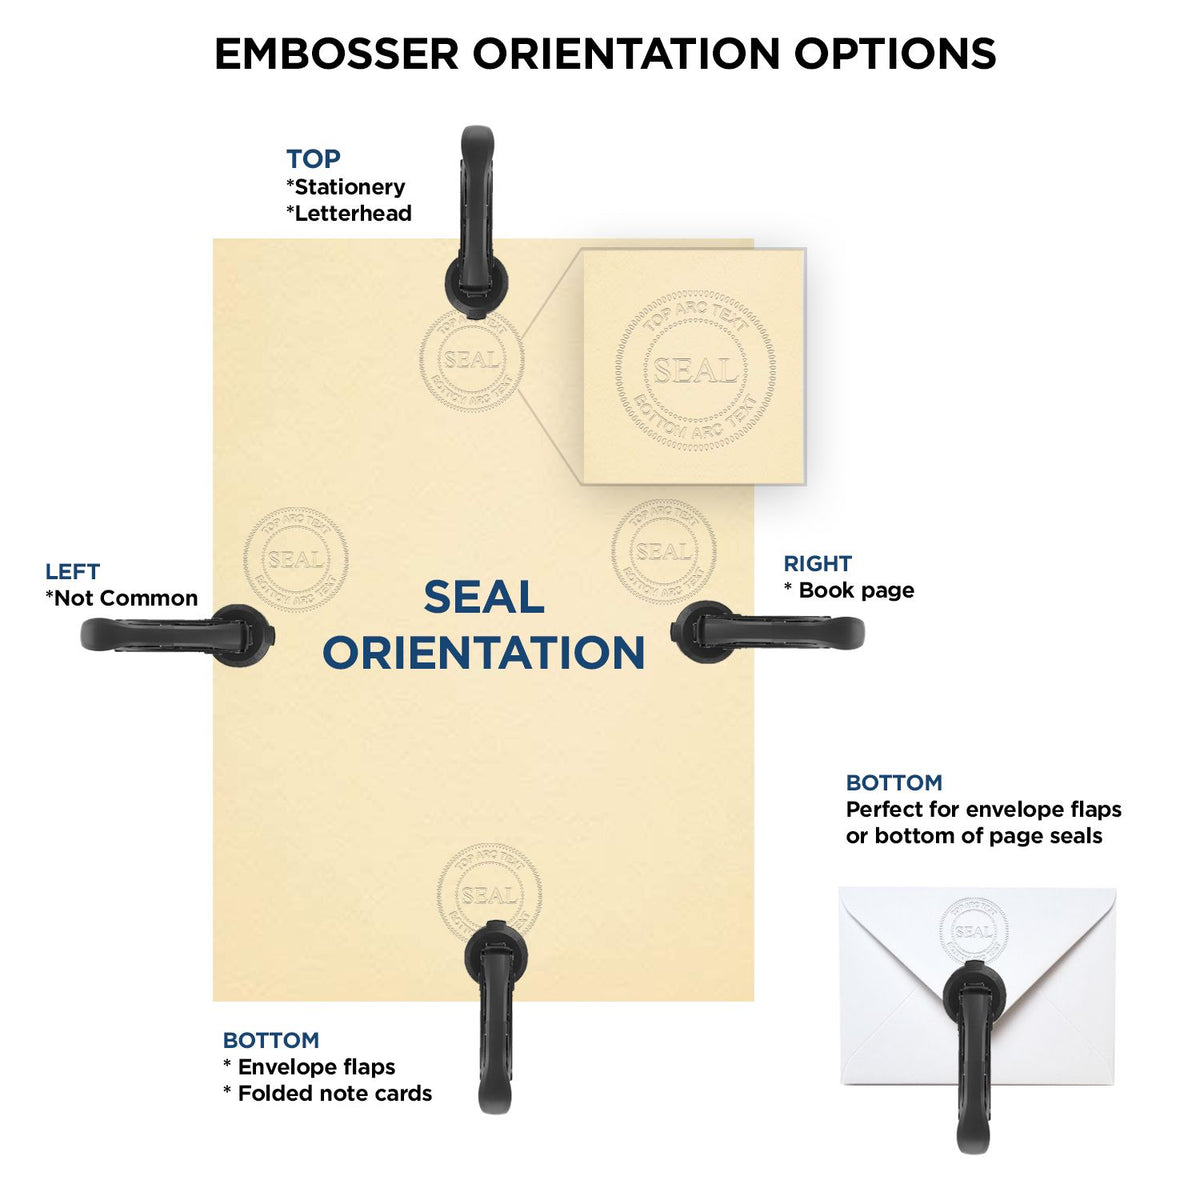 An infographic for the Heavy Duty Cast Iron Nevada Land Surveyor Seal Embosser showing embosser orientation, this is showing examples of a top, bottom, right and left insert.